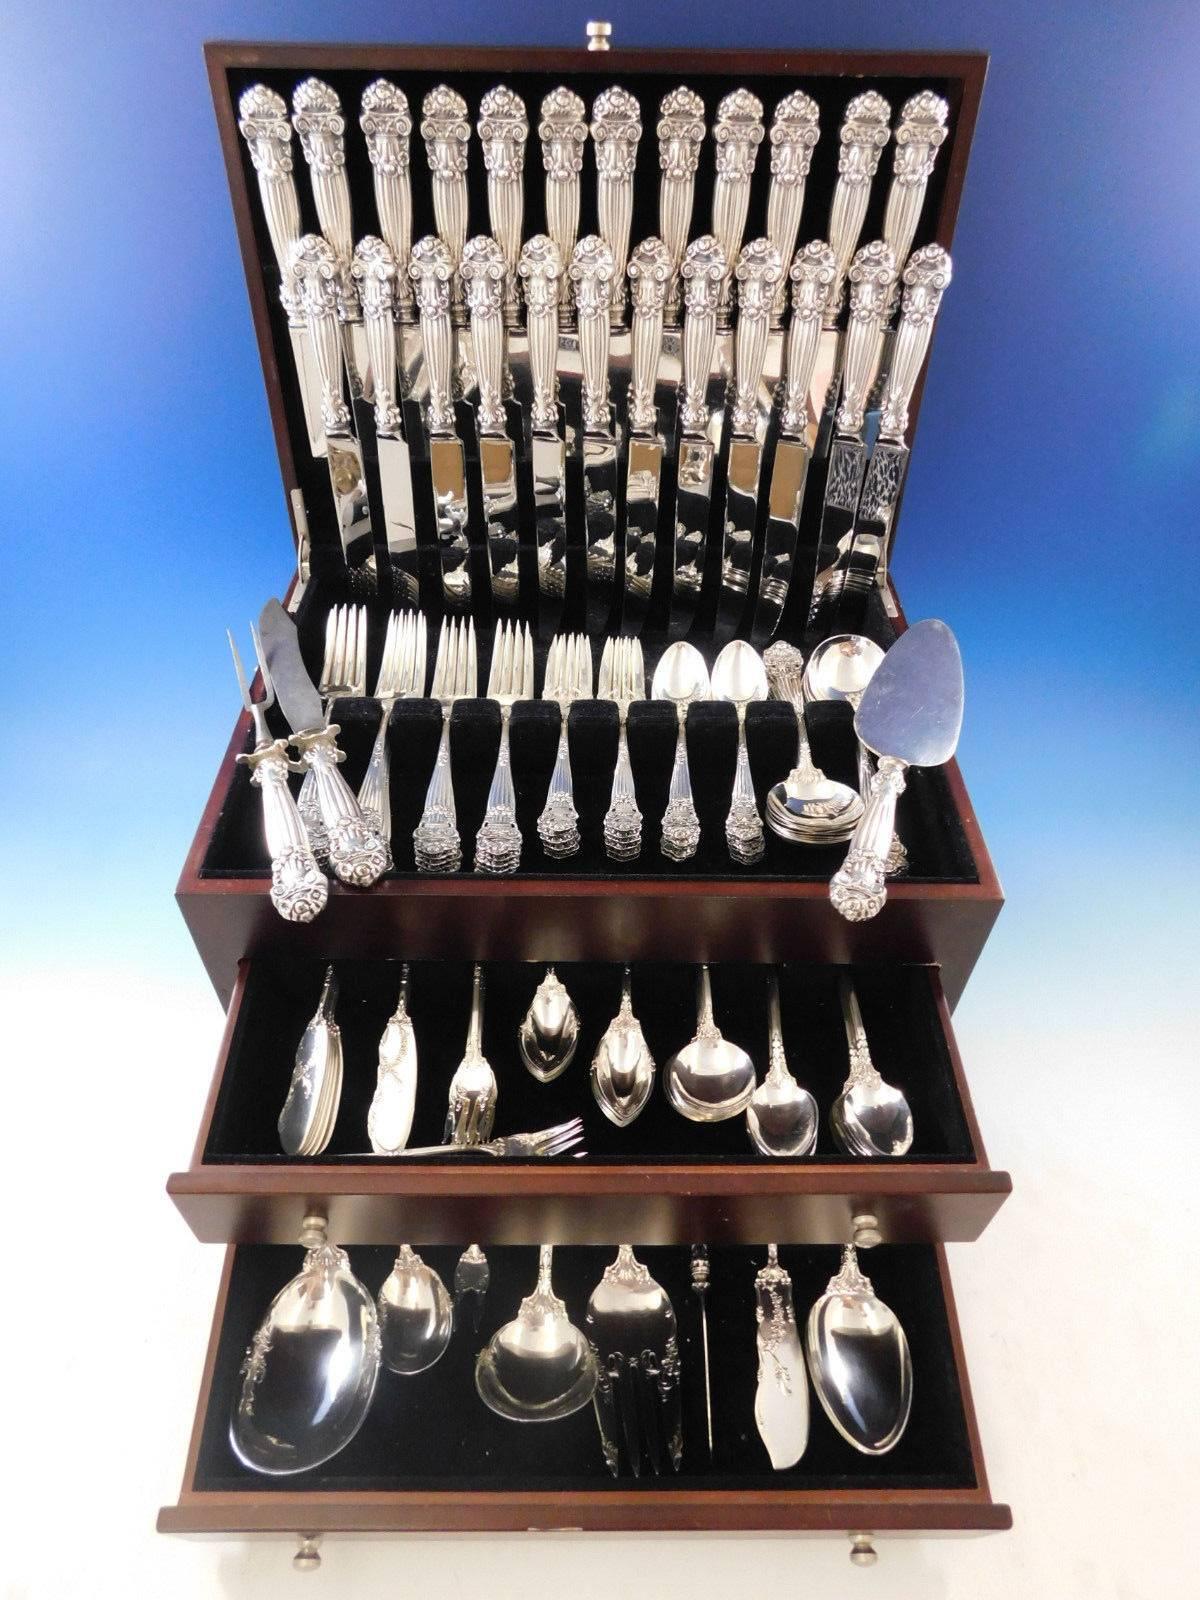 Incredible monumental Georgian by Towle sterling silver flatware set of 158 pieces. This set includes:

12 dinner size knives, with blunt silverplated blades, 9 7/8